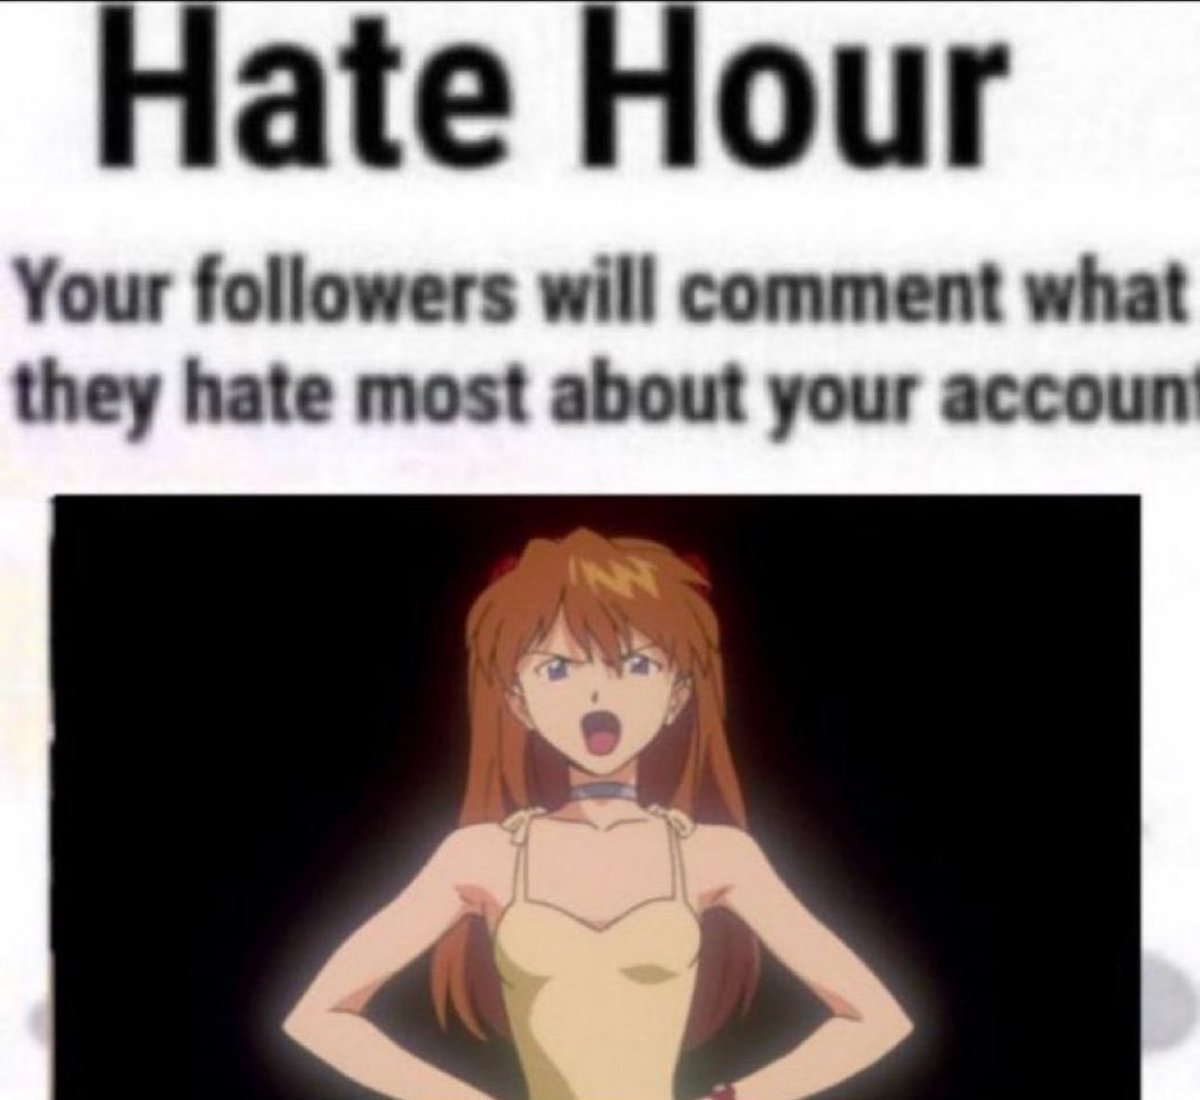 I welcome your hatred.